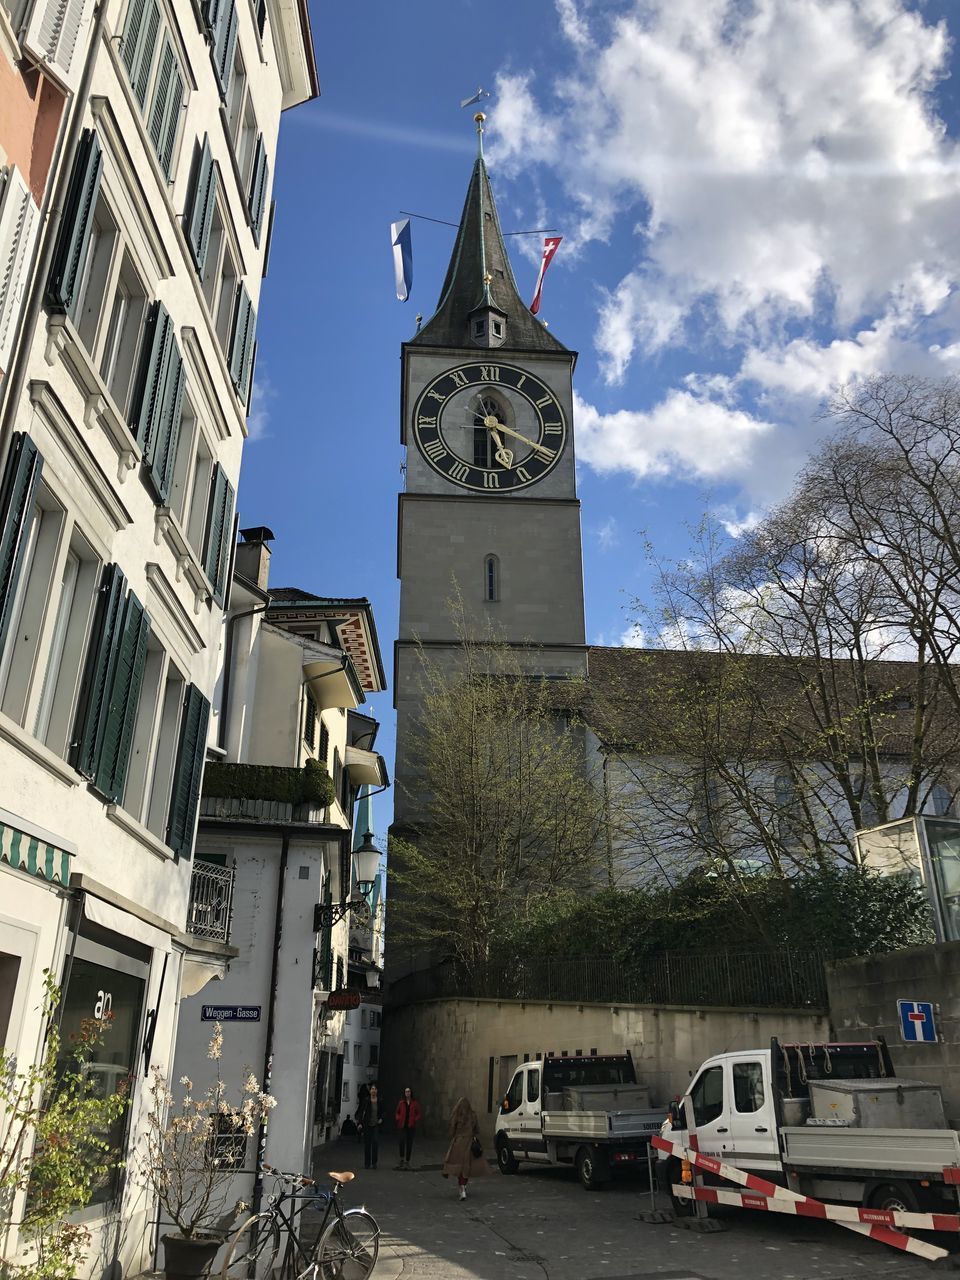 LOW ANGLE VIEW OF CLOCK TOWER AND BUILDINGS AGAINST SKY